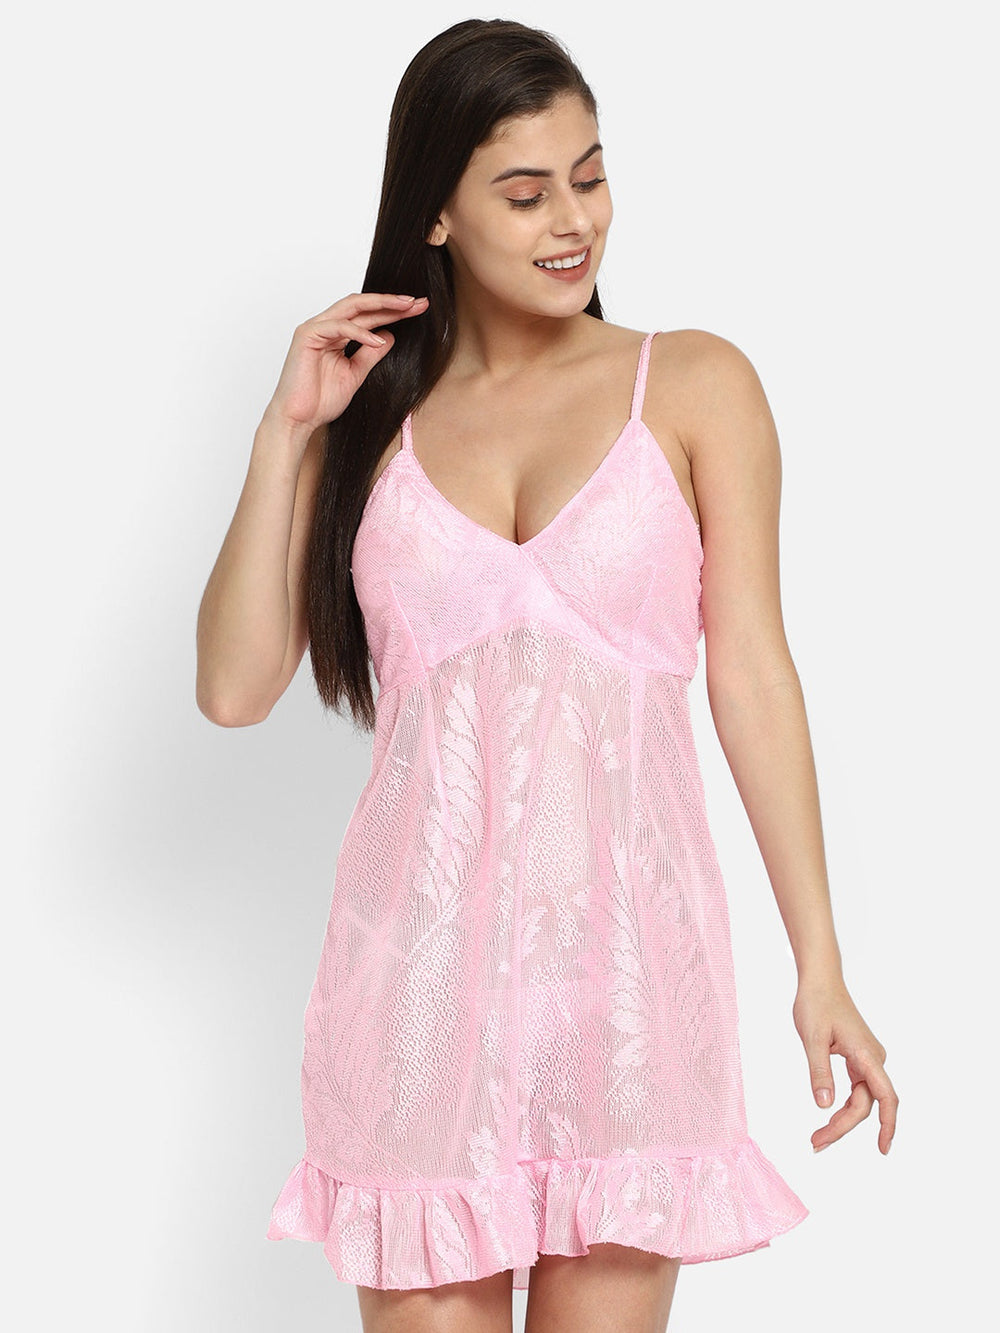 Padded Self-Patterned Babydoll In Light Pink